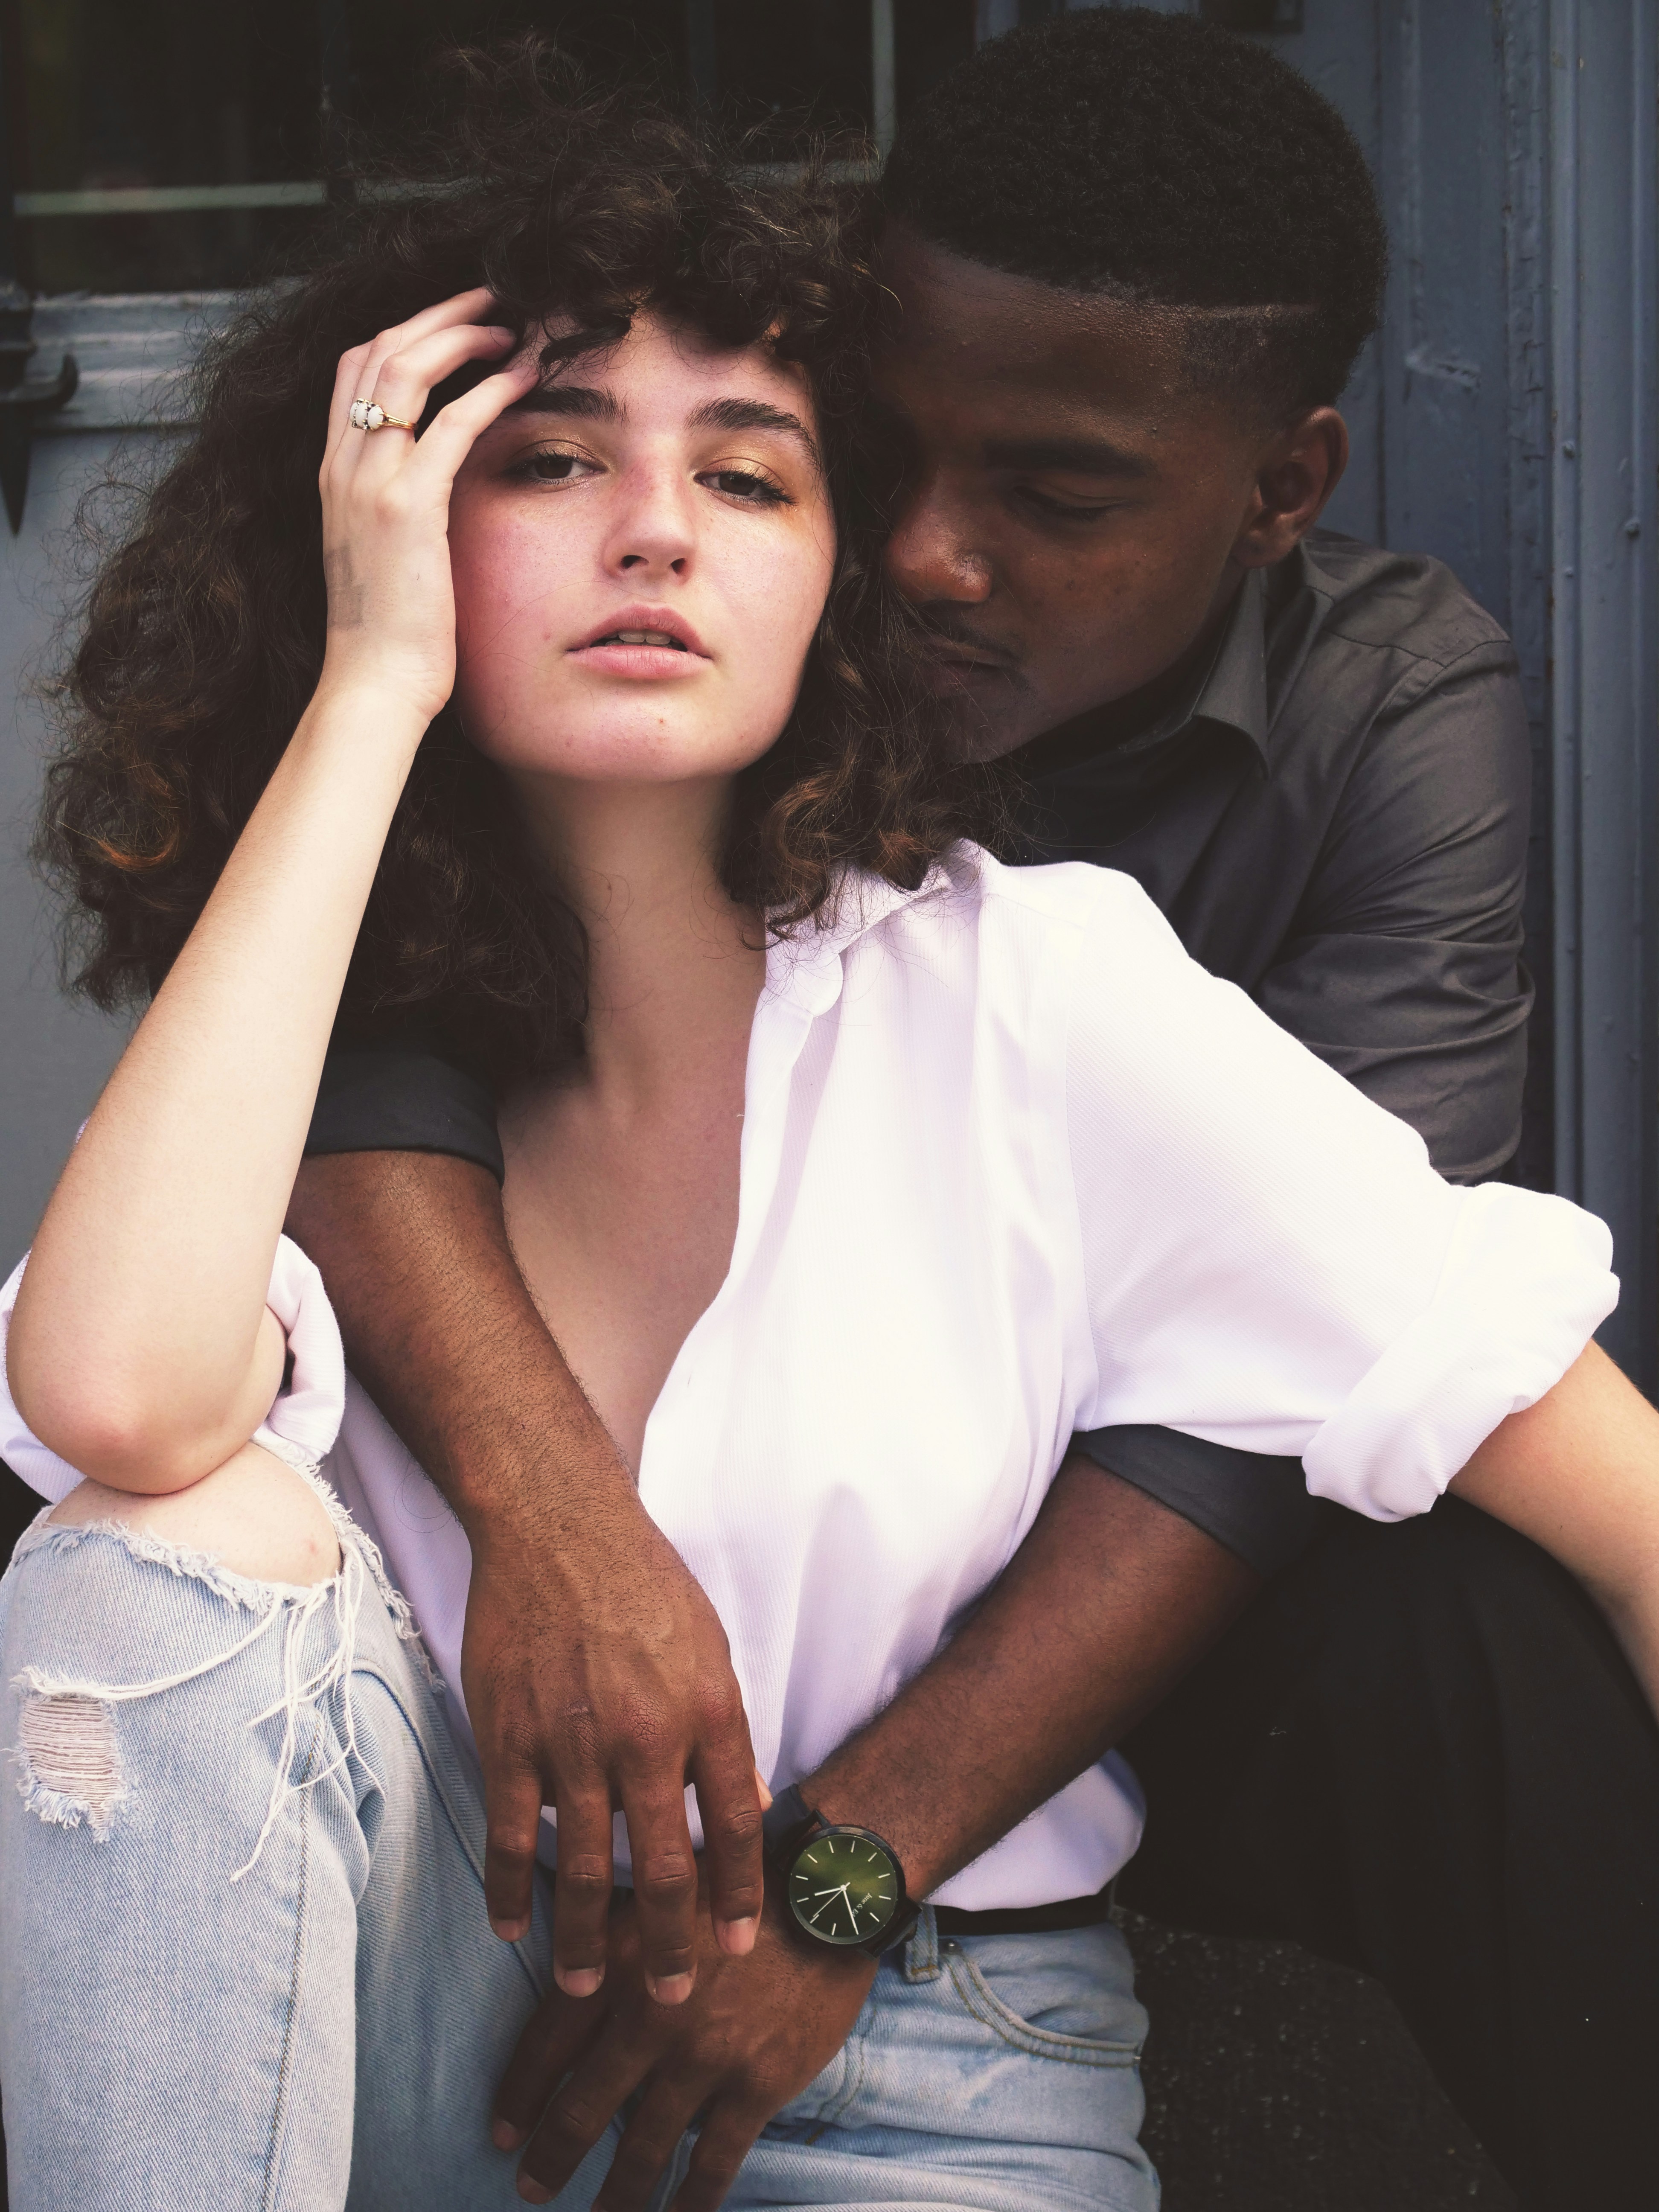 500+ Interracial Couple Pictures HD Download Free Images on Unsplash pic